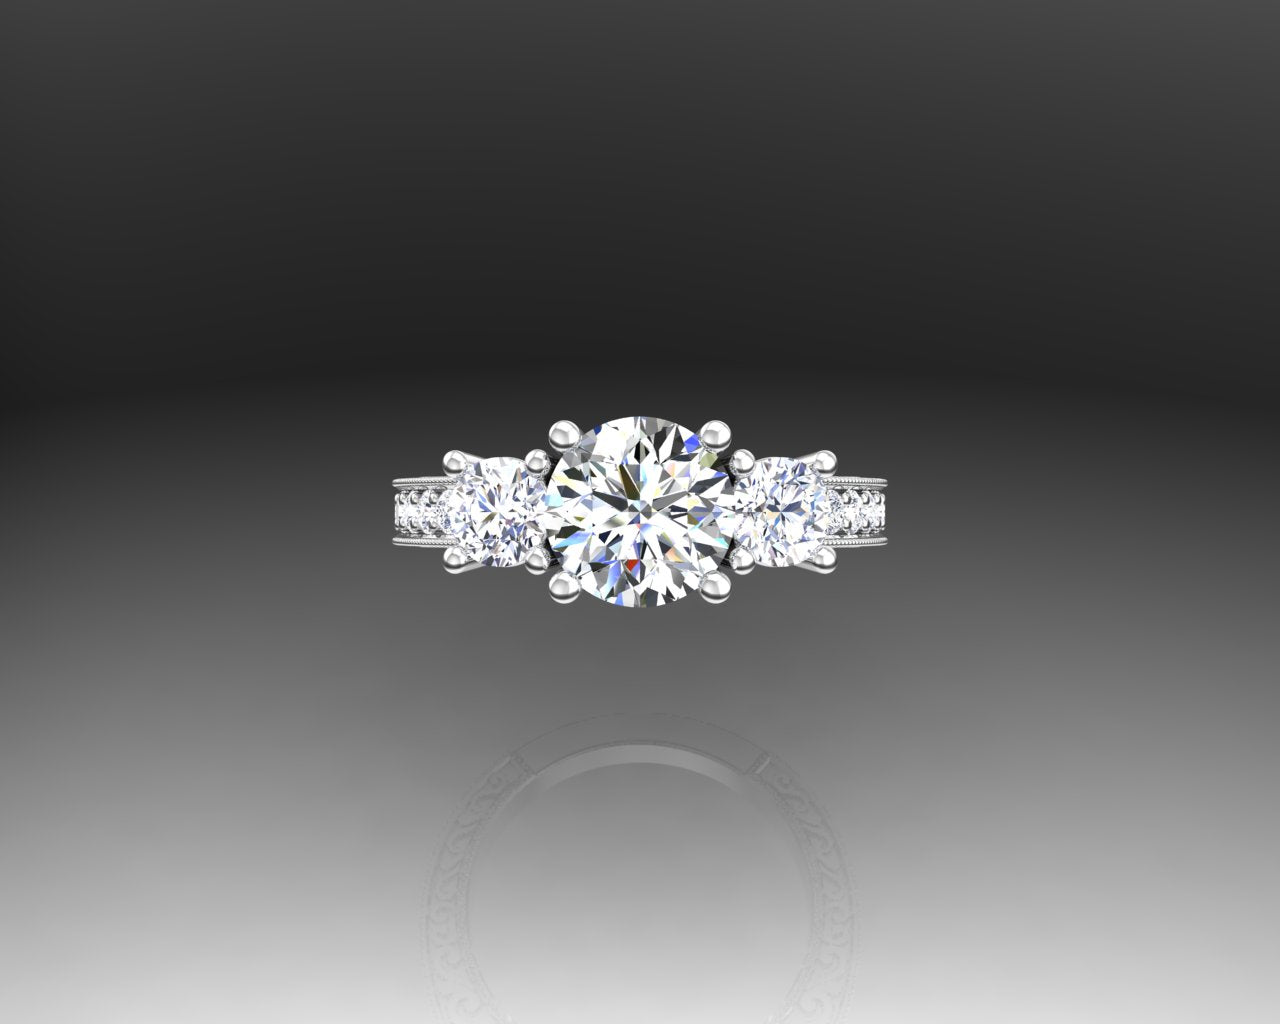 PAST PRESENT FUTURE GOLD DIAMOND ENGAGEMENT RING - Reigning Jewels Fine Jewelry 